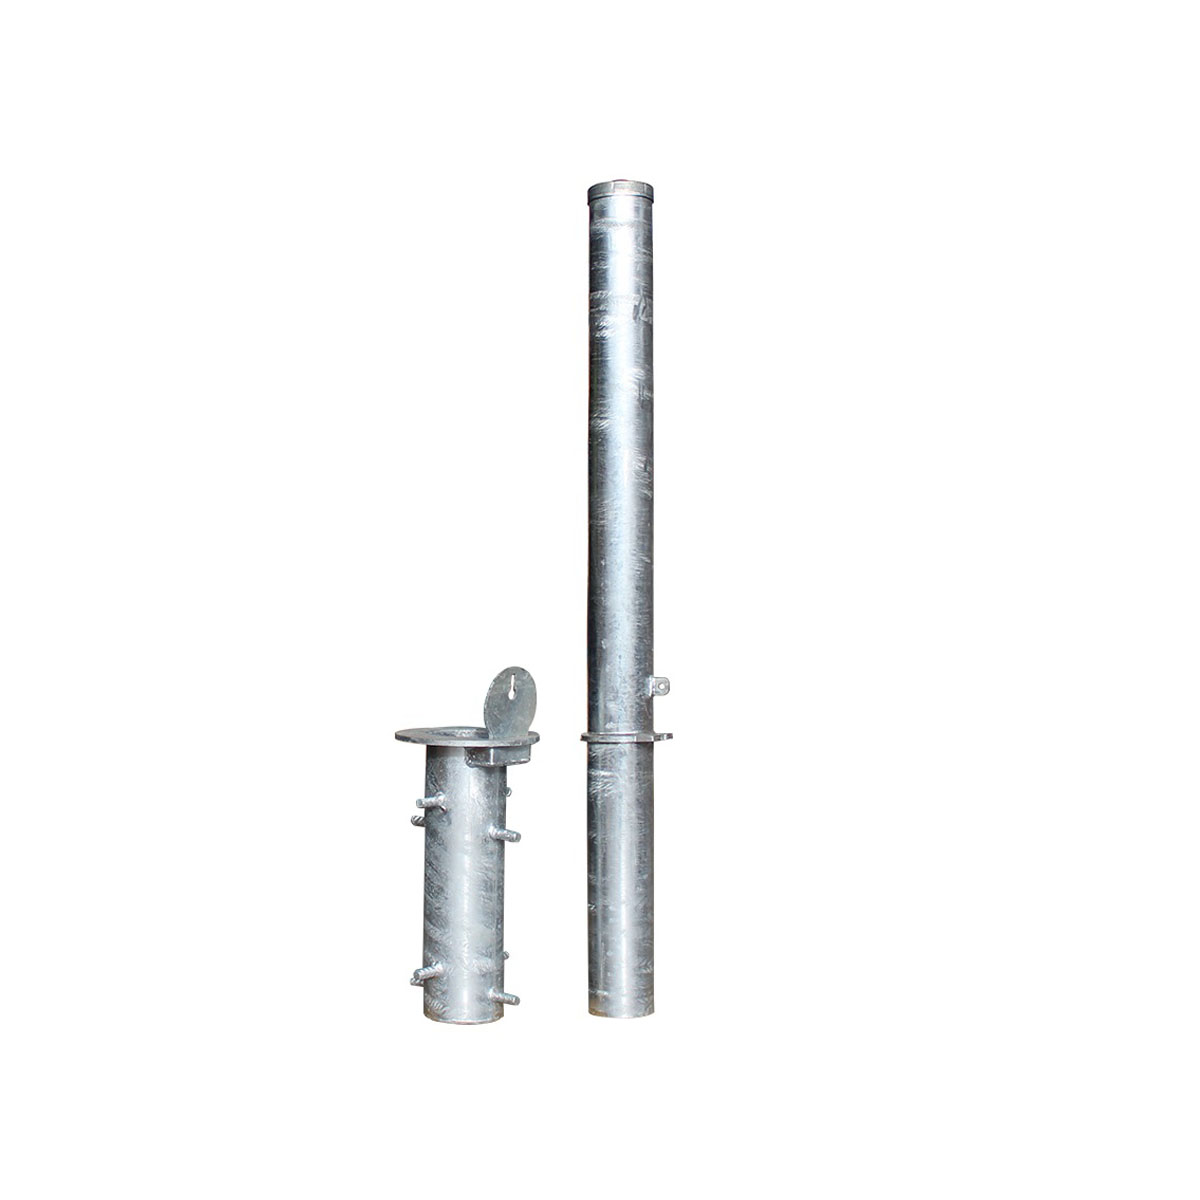 Buy Cast-in Bollard - Removable (Galvanised) in Cast-in Bollards from GuardX available at Astrolift NZ